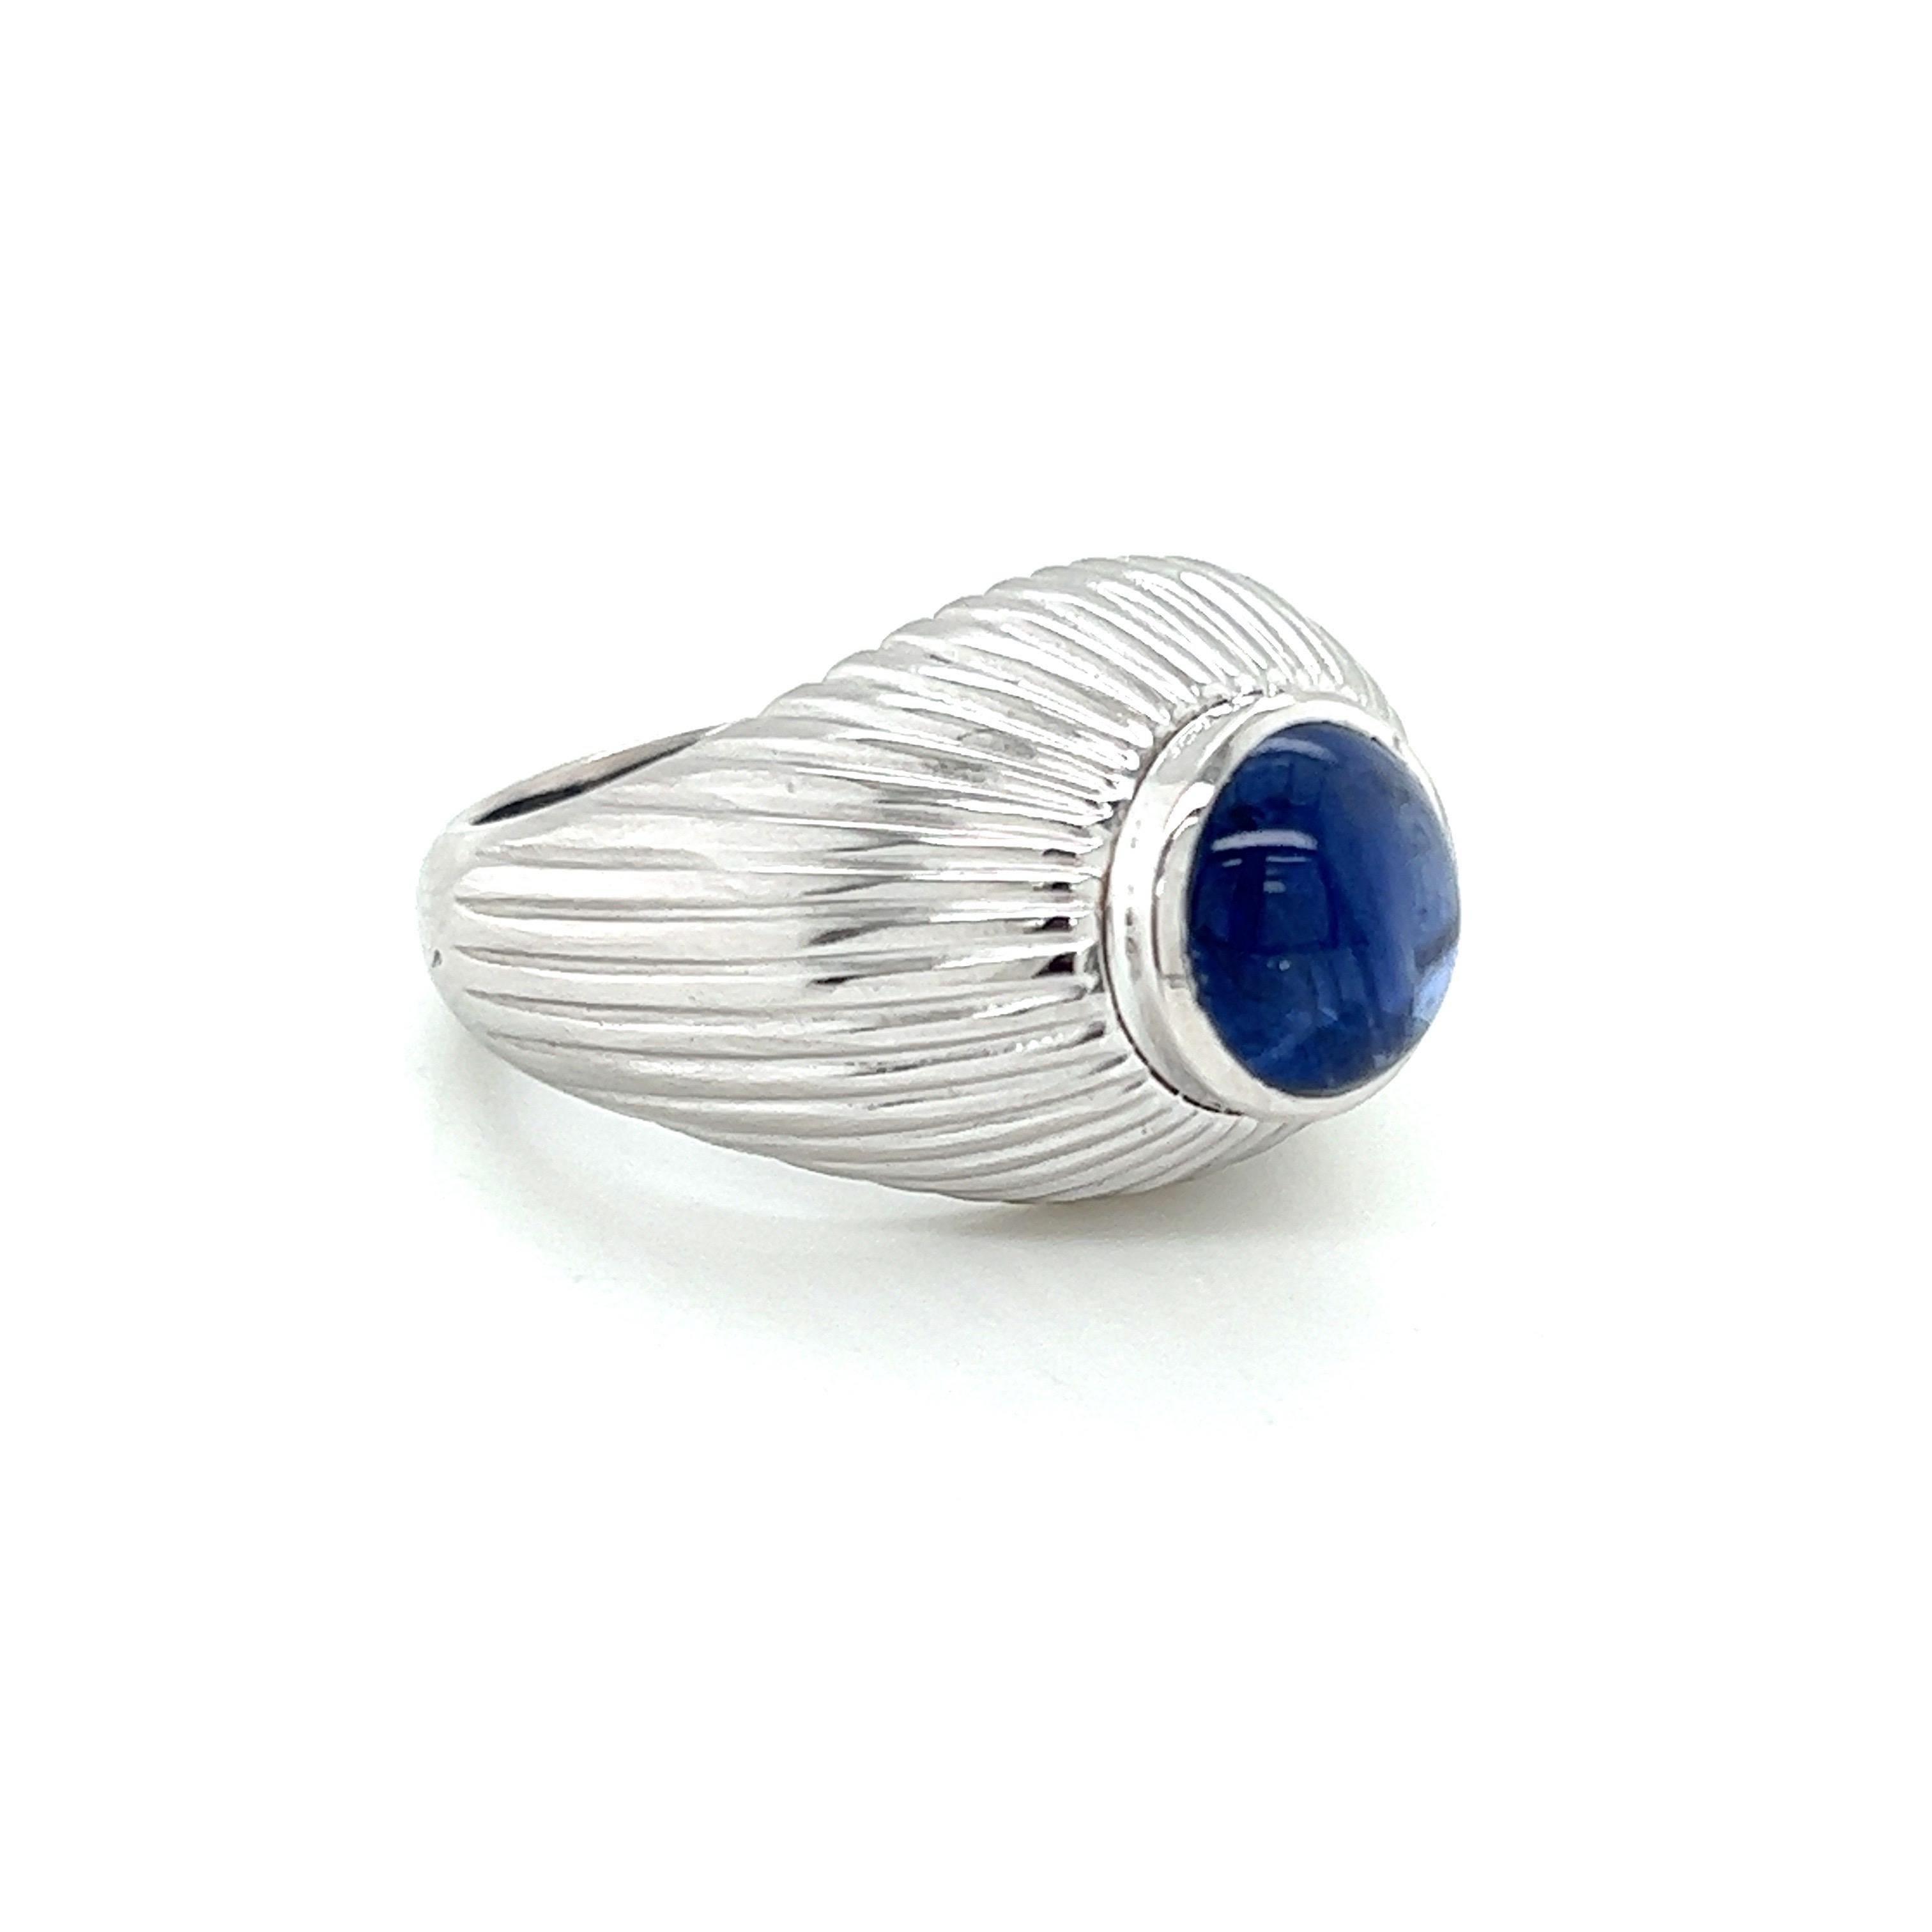 18k White Gold and Approx. 3.5ct Cabochon Sapphire Gents Ring Size 7